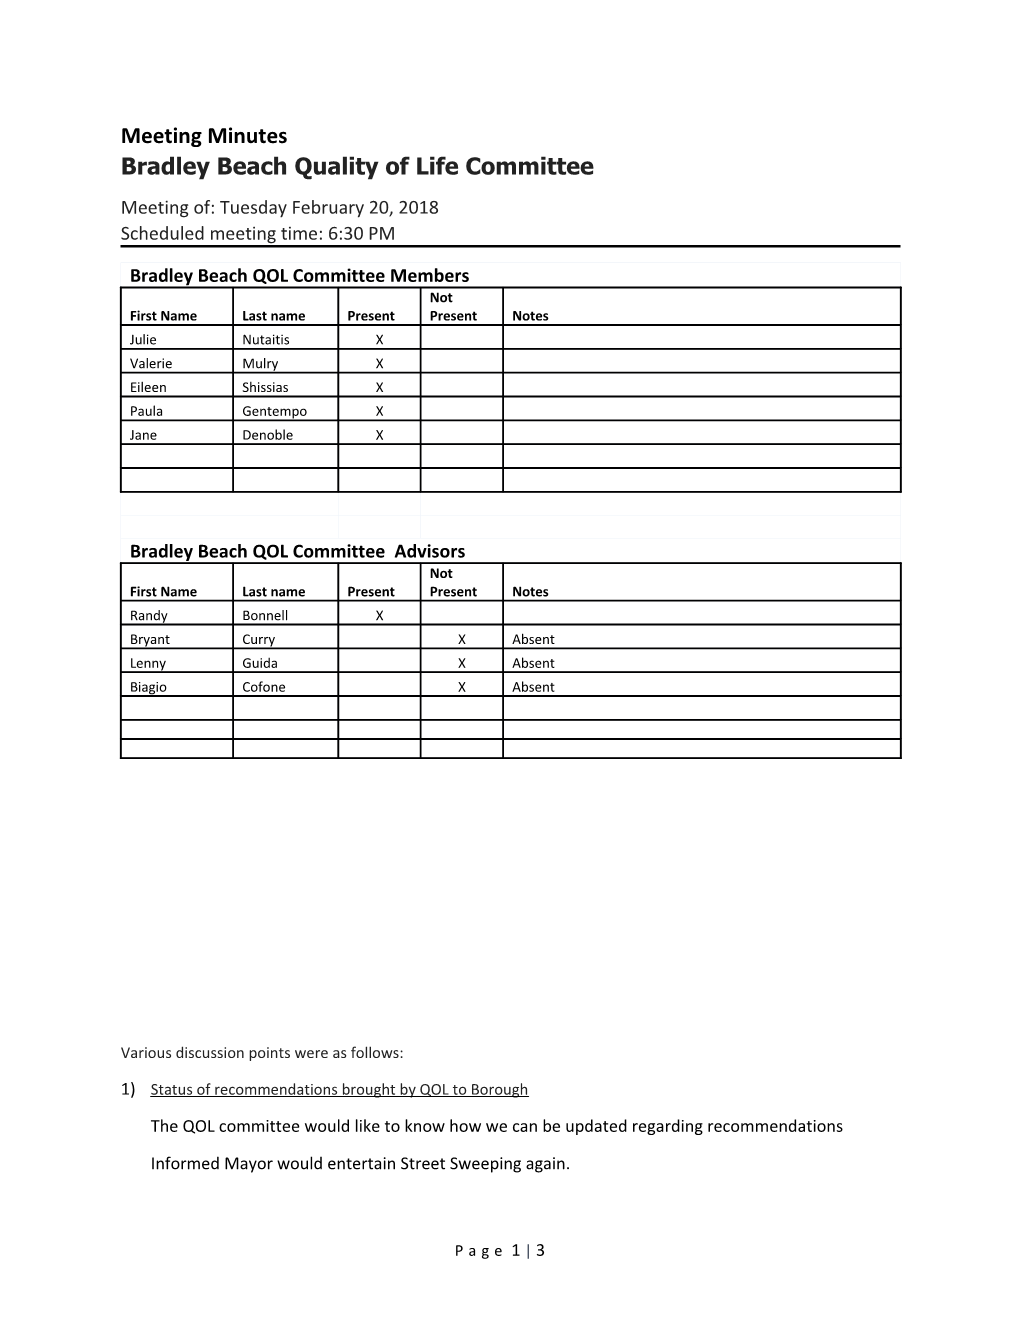 Meeting Minutes Bradley Beach Quality of Life Committee